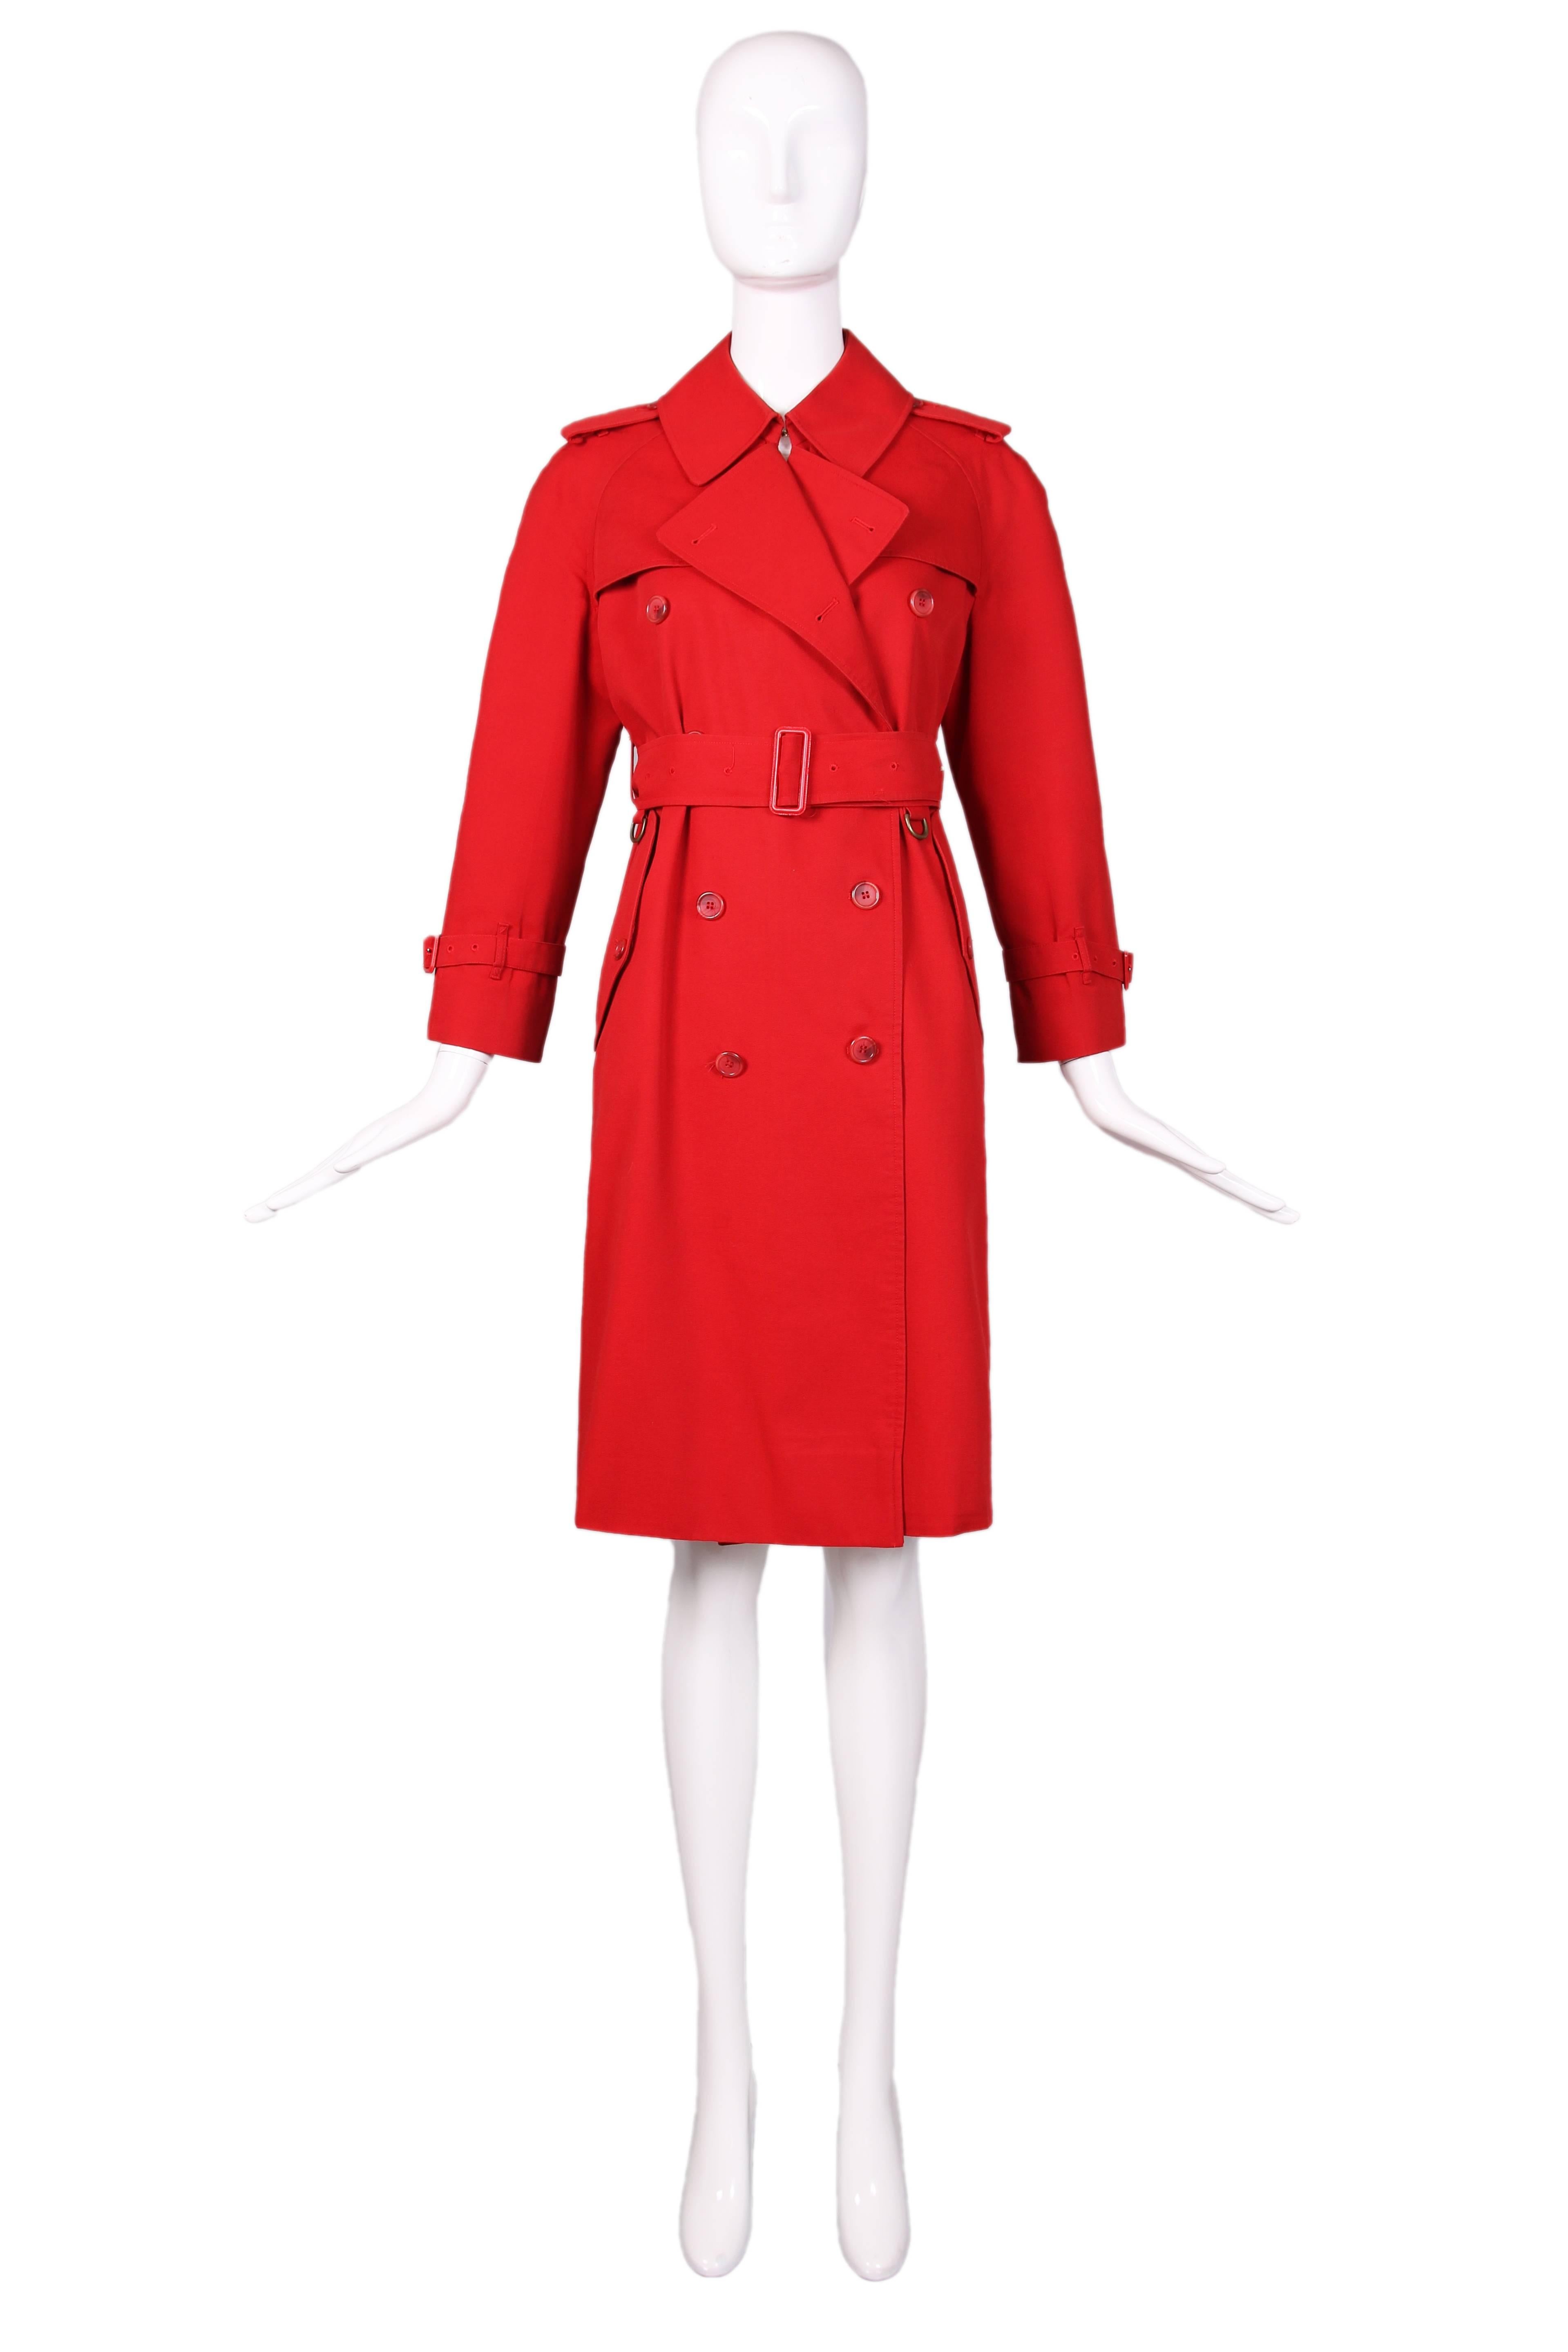 Classic Burberry red trench coat with nova check lining. Cotton blend, double-breasted coat with belted cuffs, plastic buttons, and two side pockets. Matching waist belt is detailed with metal D-rings. In excellent condition with a few unnoticeable